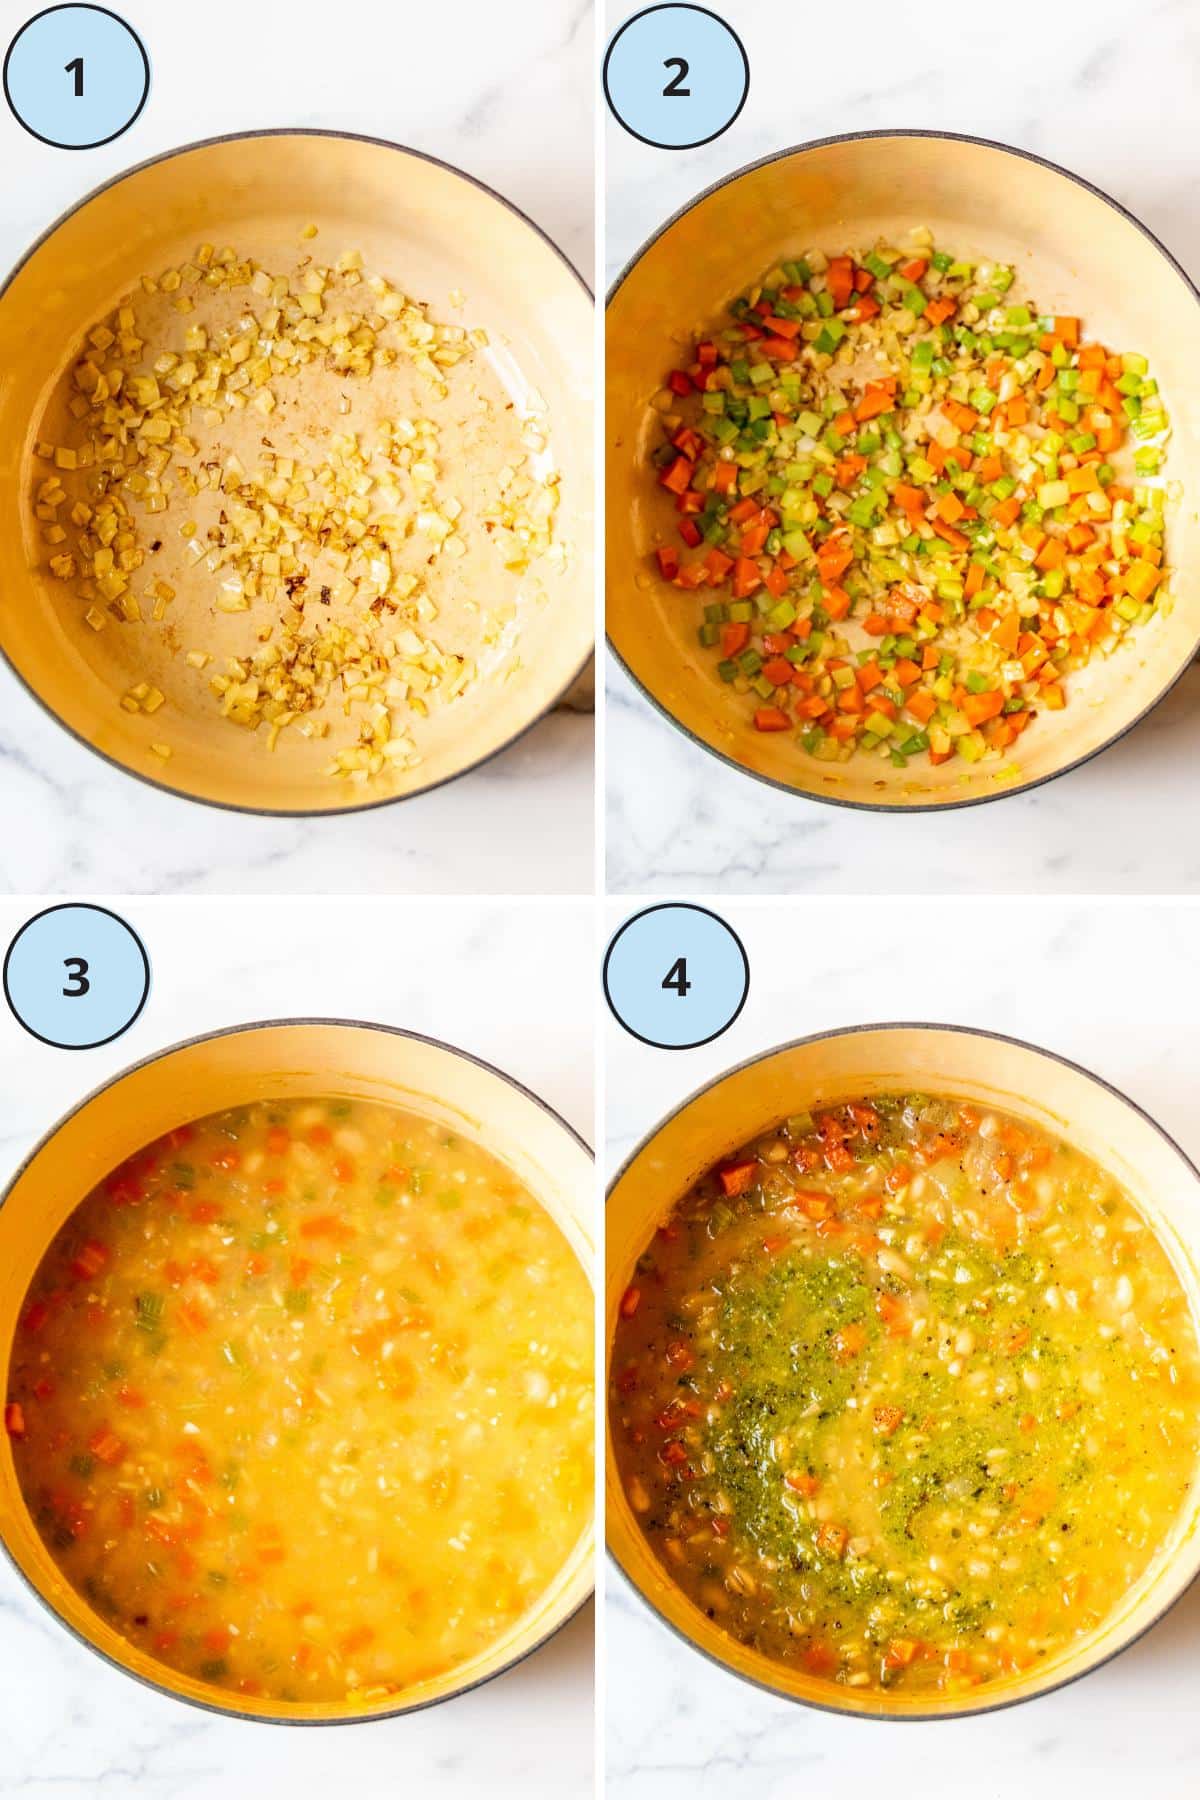 Steps showing how to make Vegan Pesto Orzo Soup: Sauteing the onion, garlic, carrots and celery, simmering the broth with the orzo and beans, and pesto stirred into the finished soup.